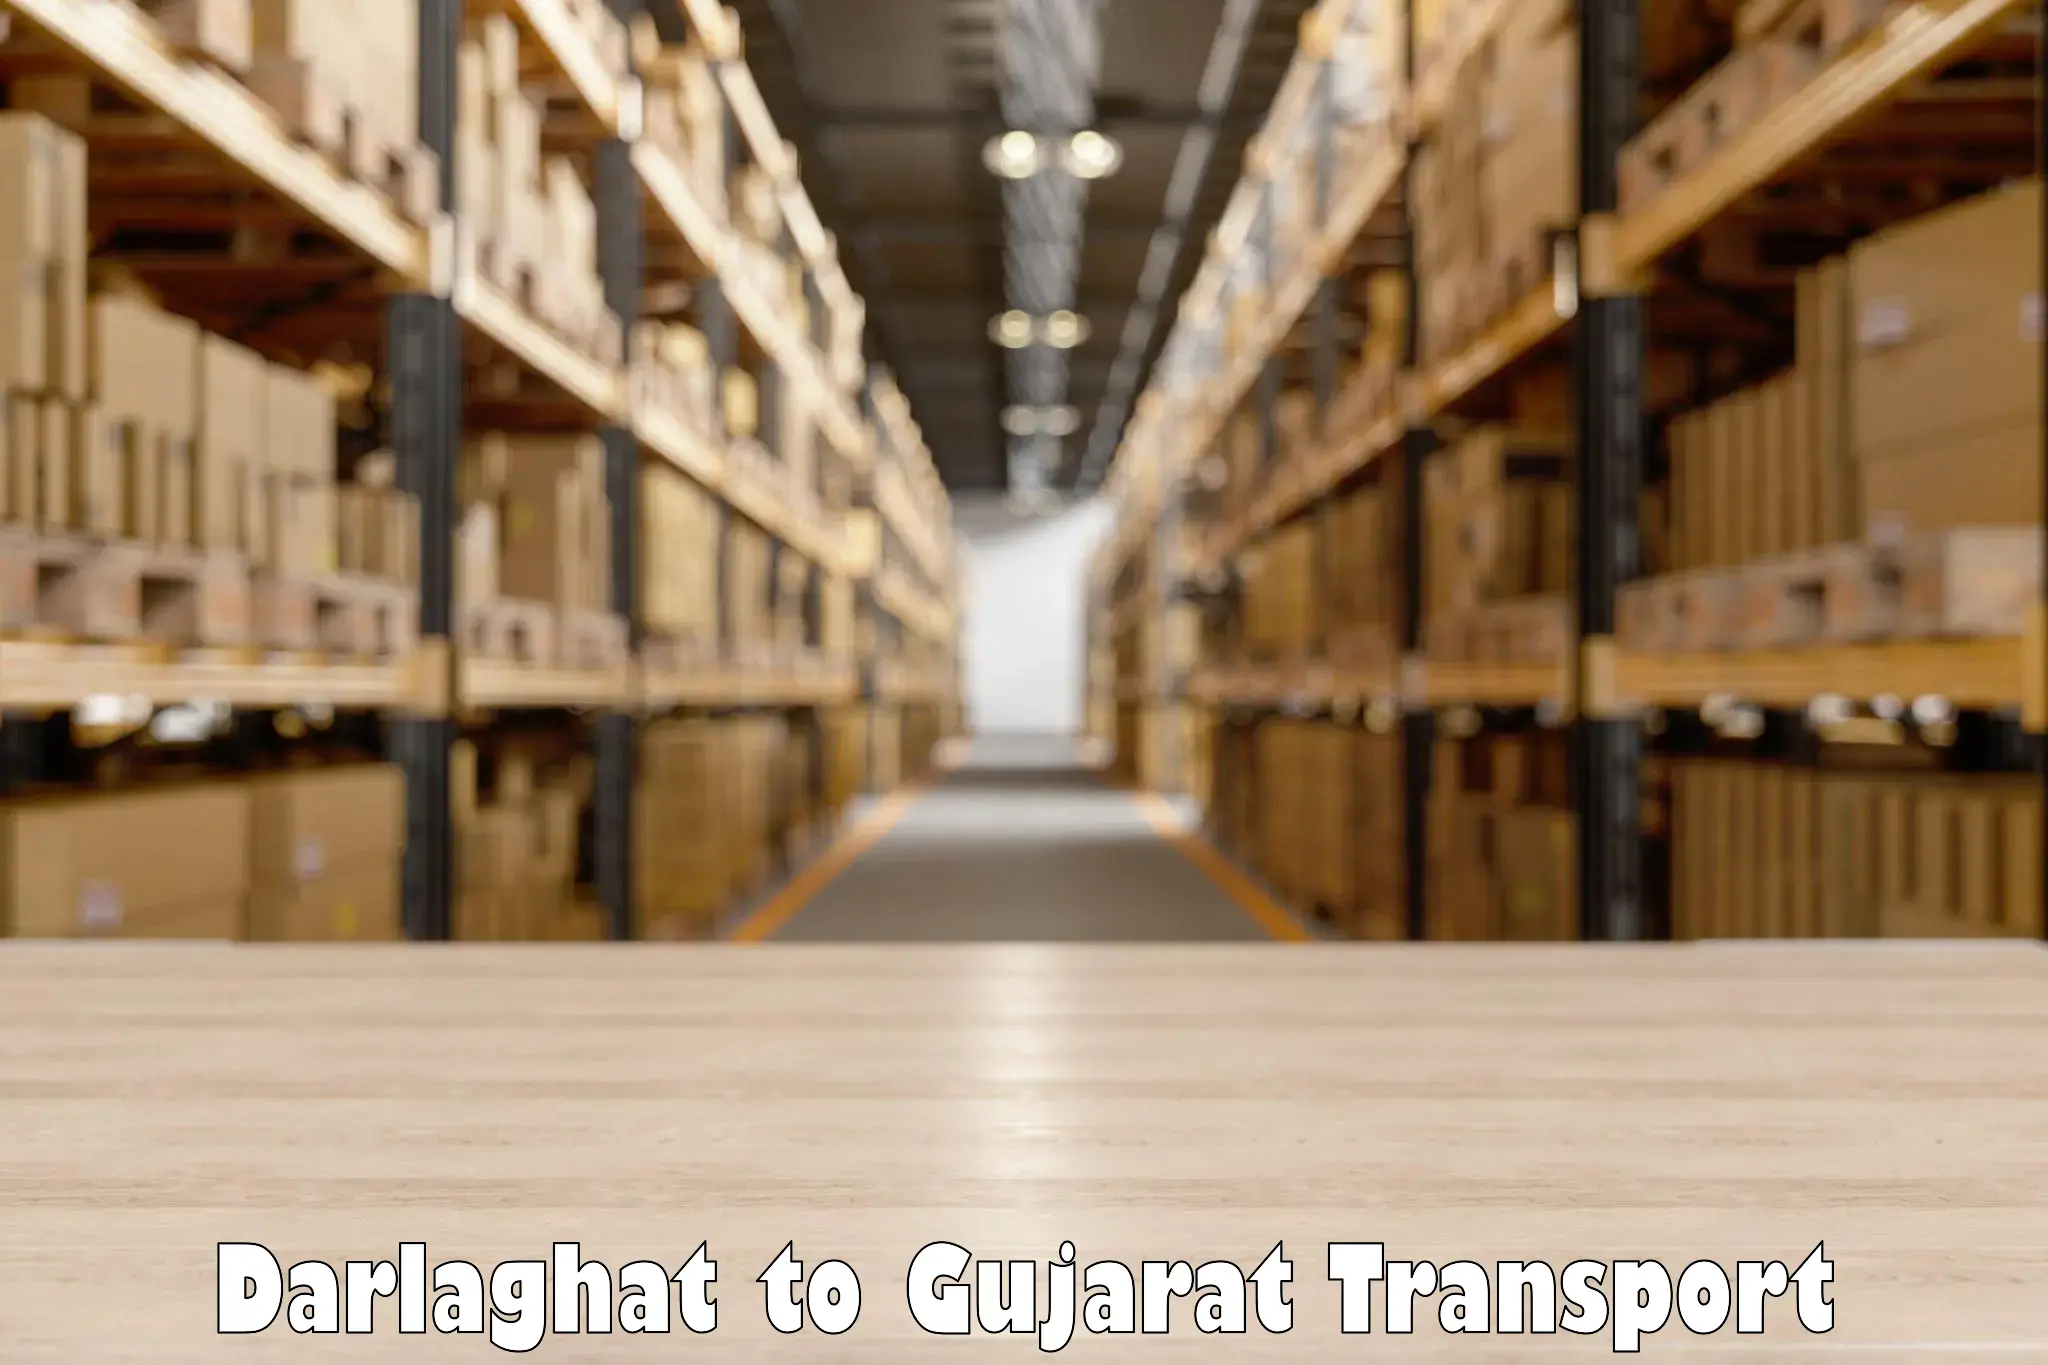 Daily transport service Darlaghat to Patan Gujarat